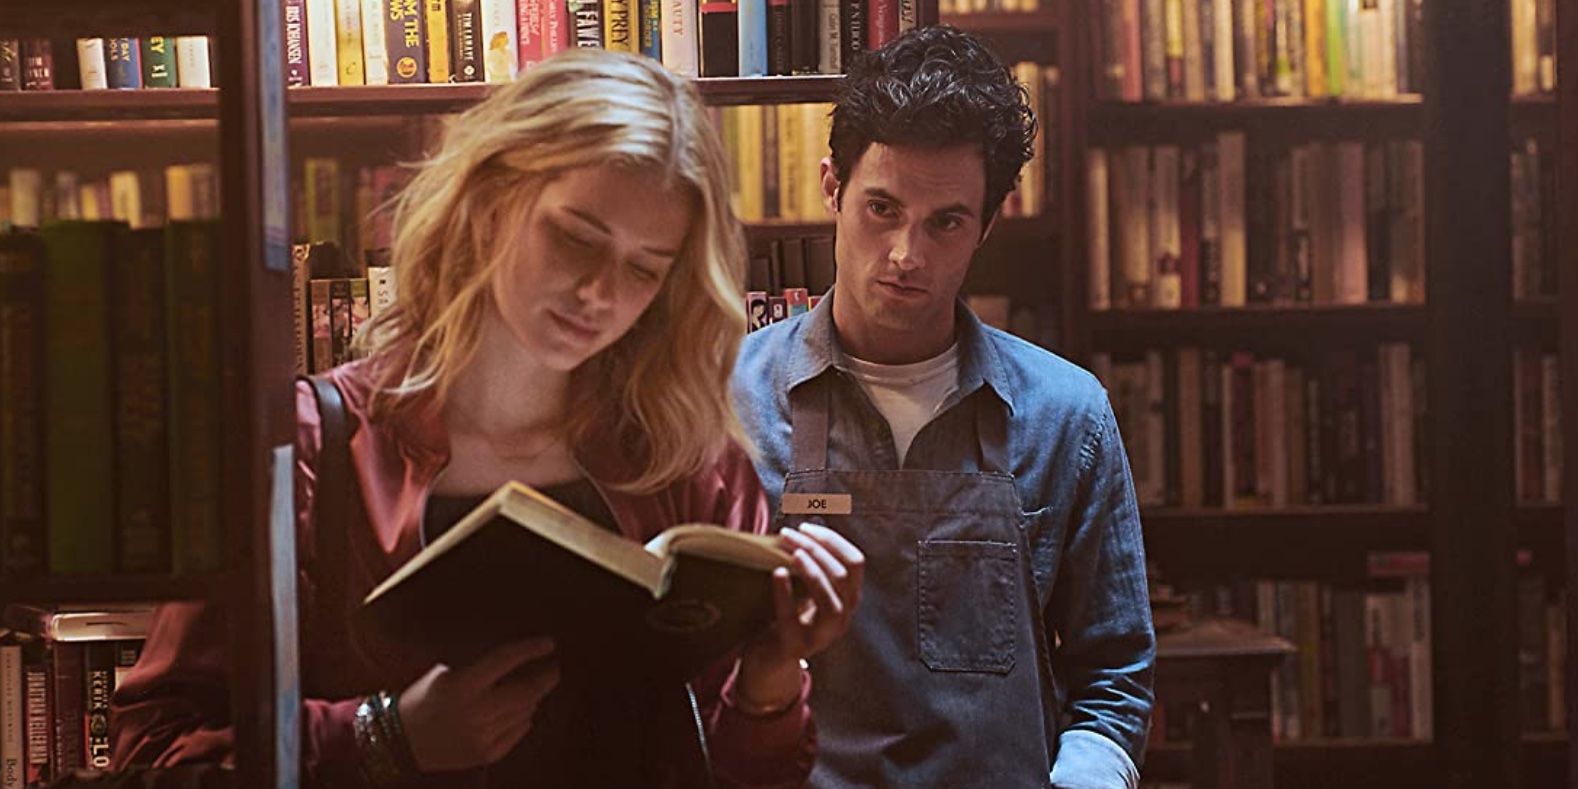 Elizabeth Lail in a library reading a book while Penn Badgley stands behind her in 'You'